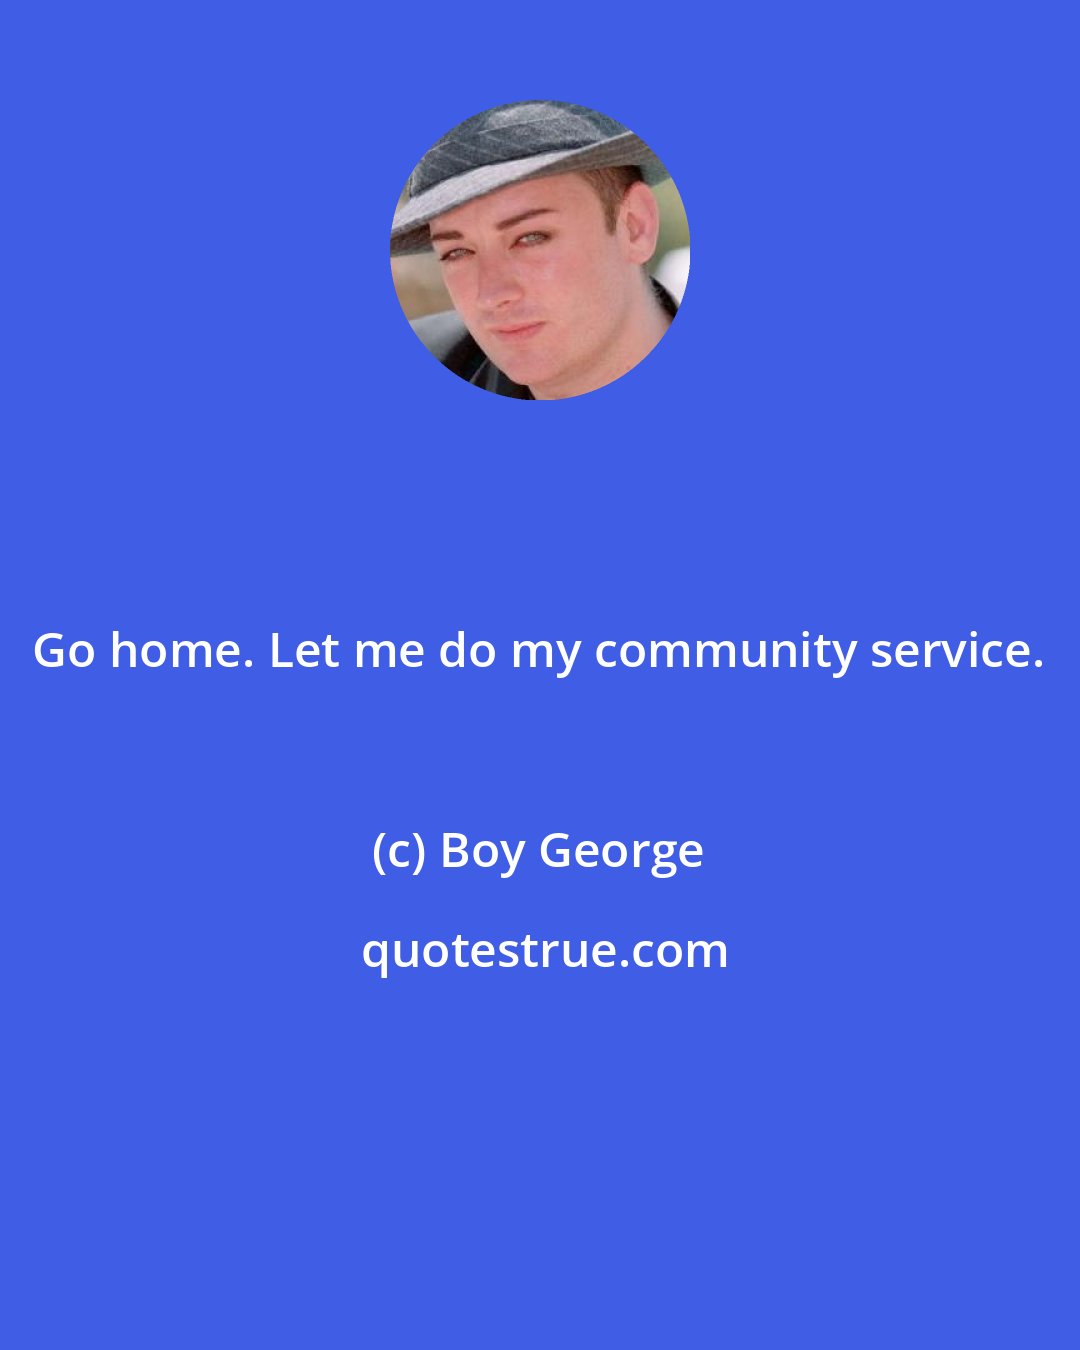 Boy George: Go home. Let me do my community service.